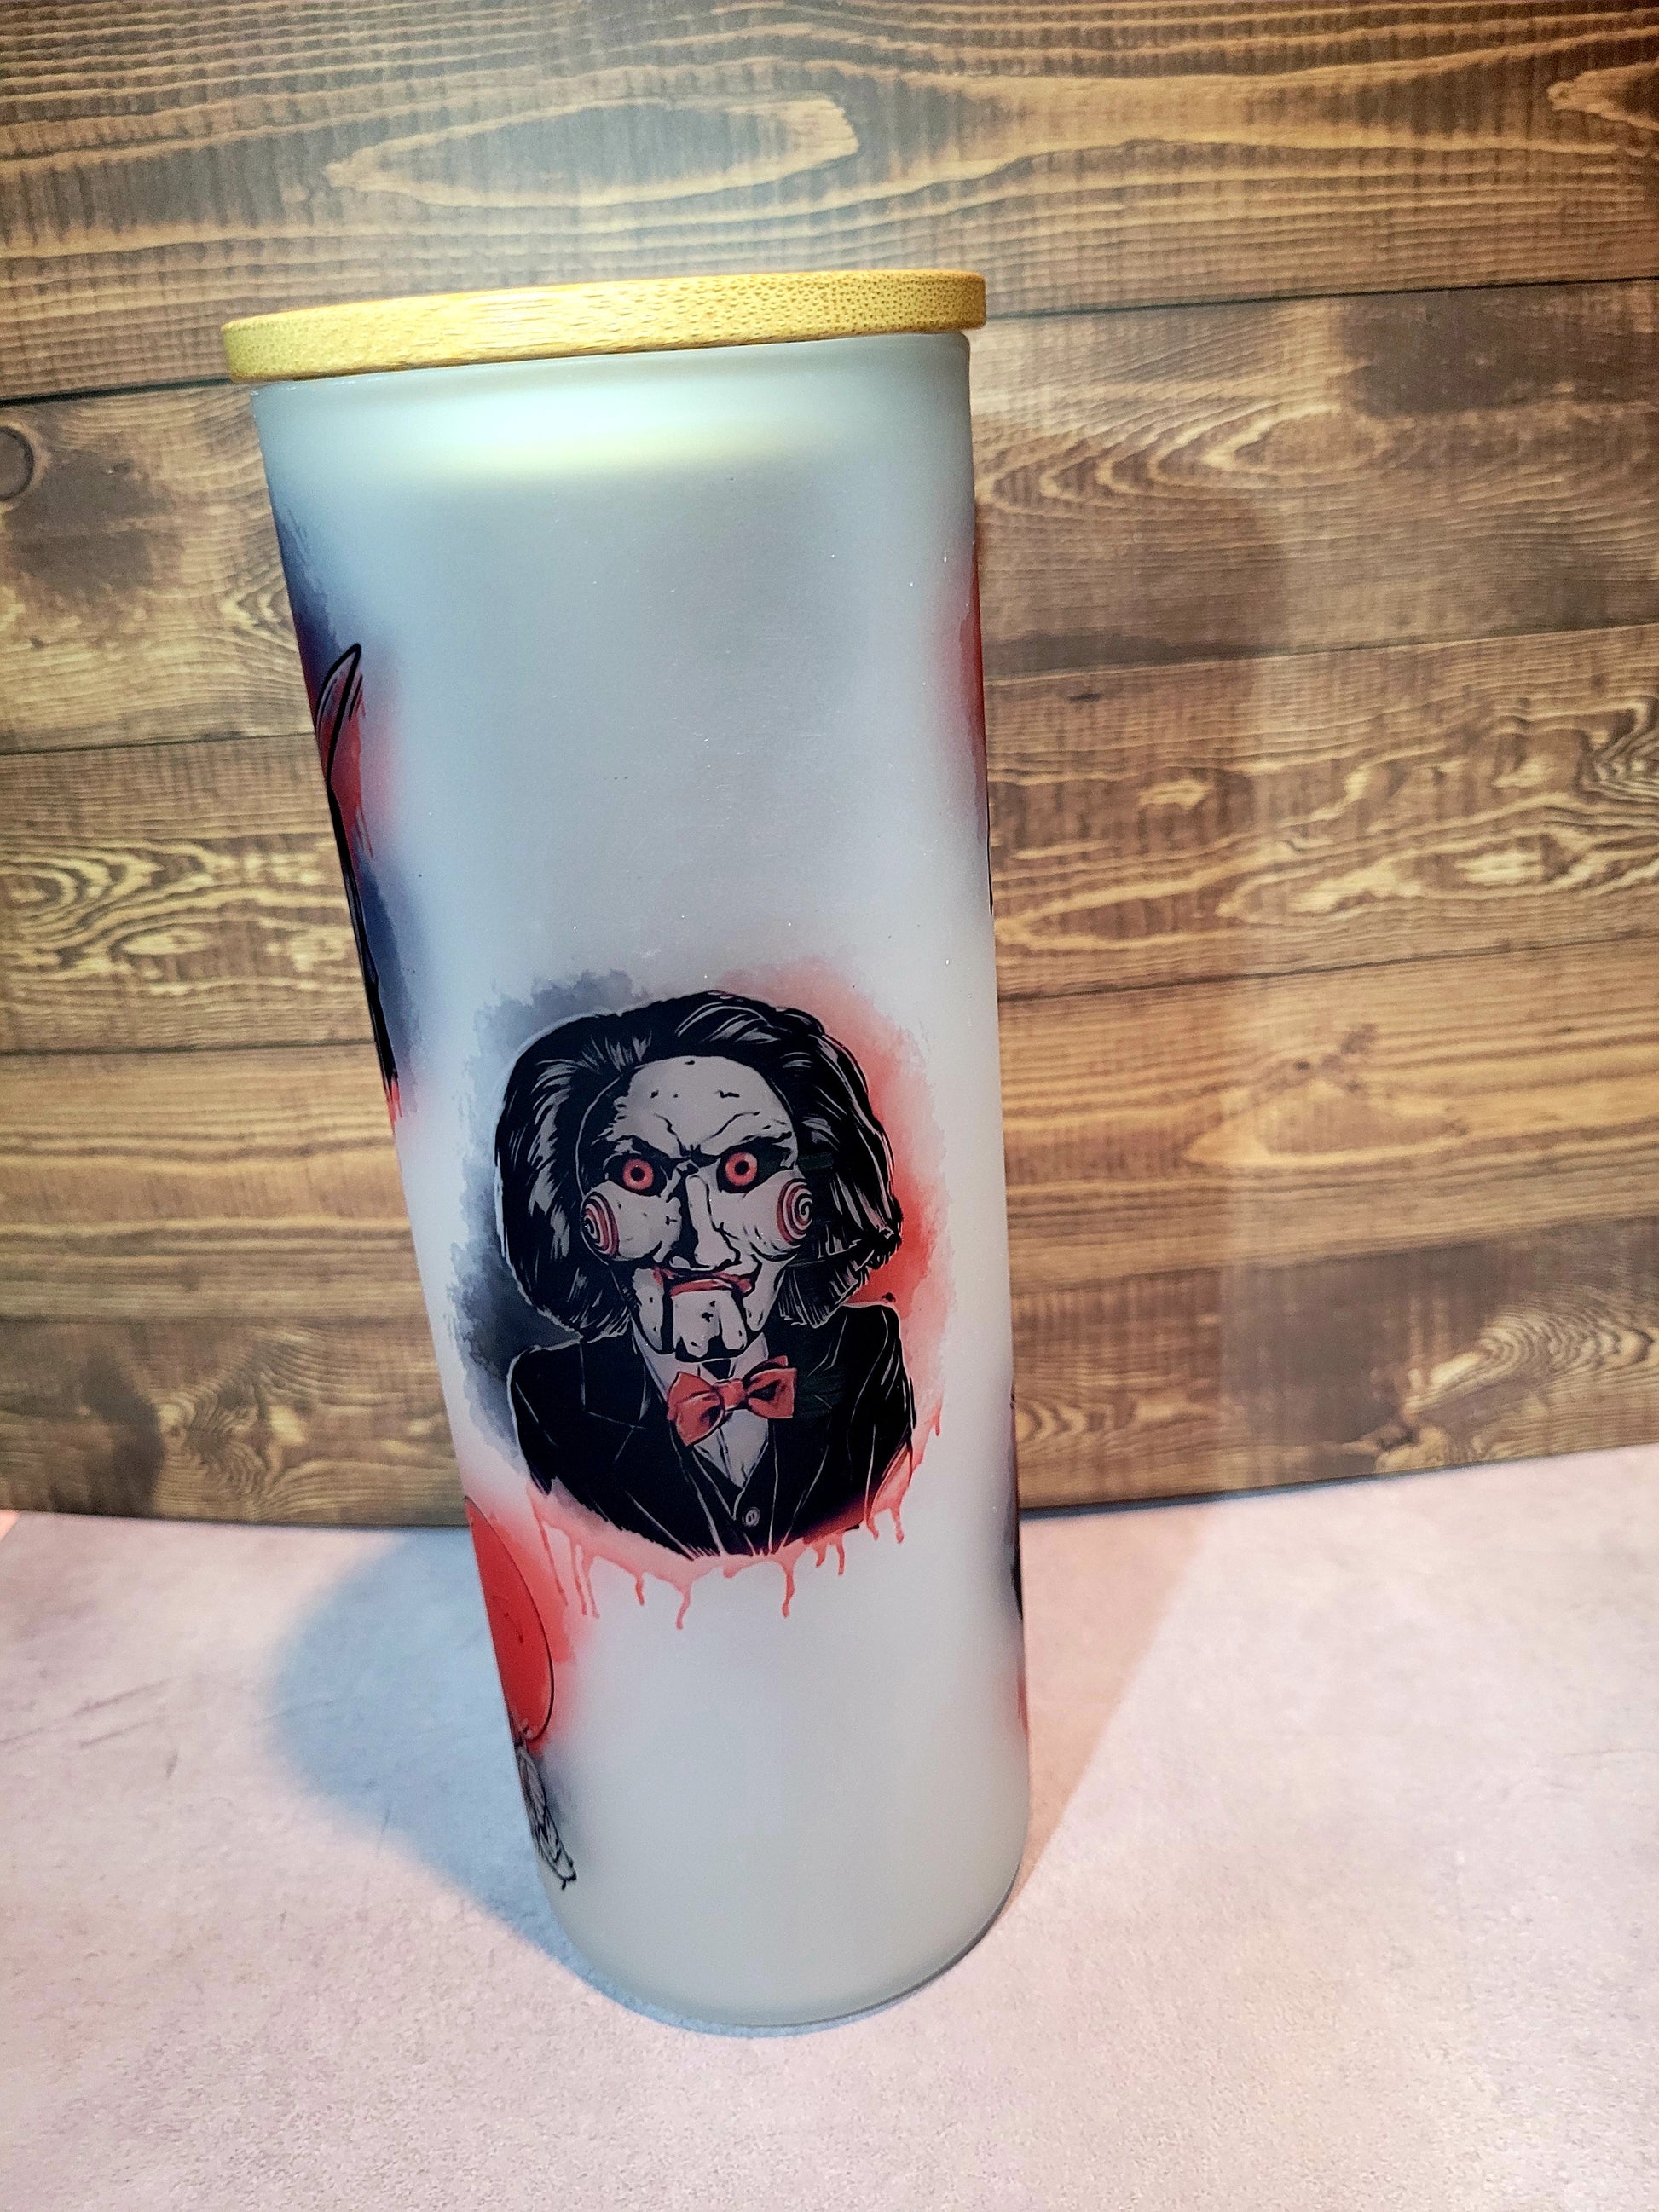 25oz frosted glass tumblers